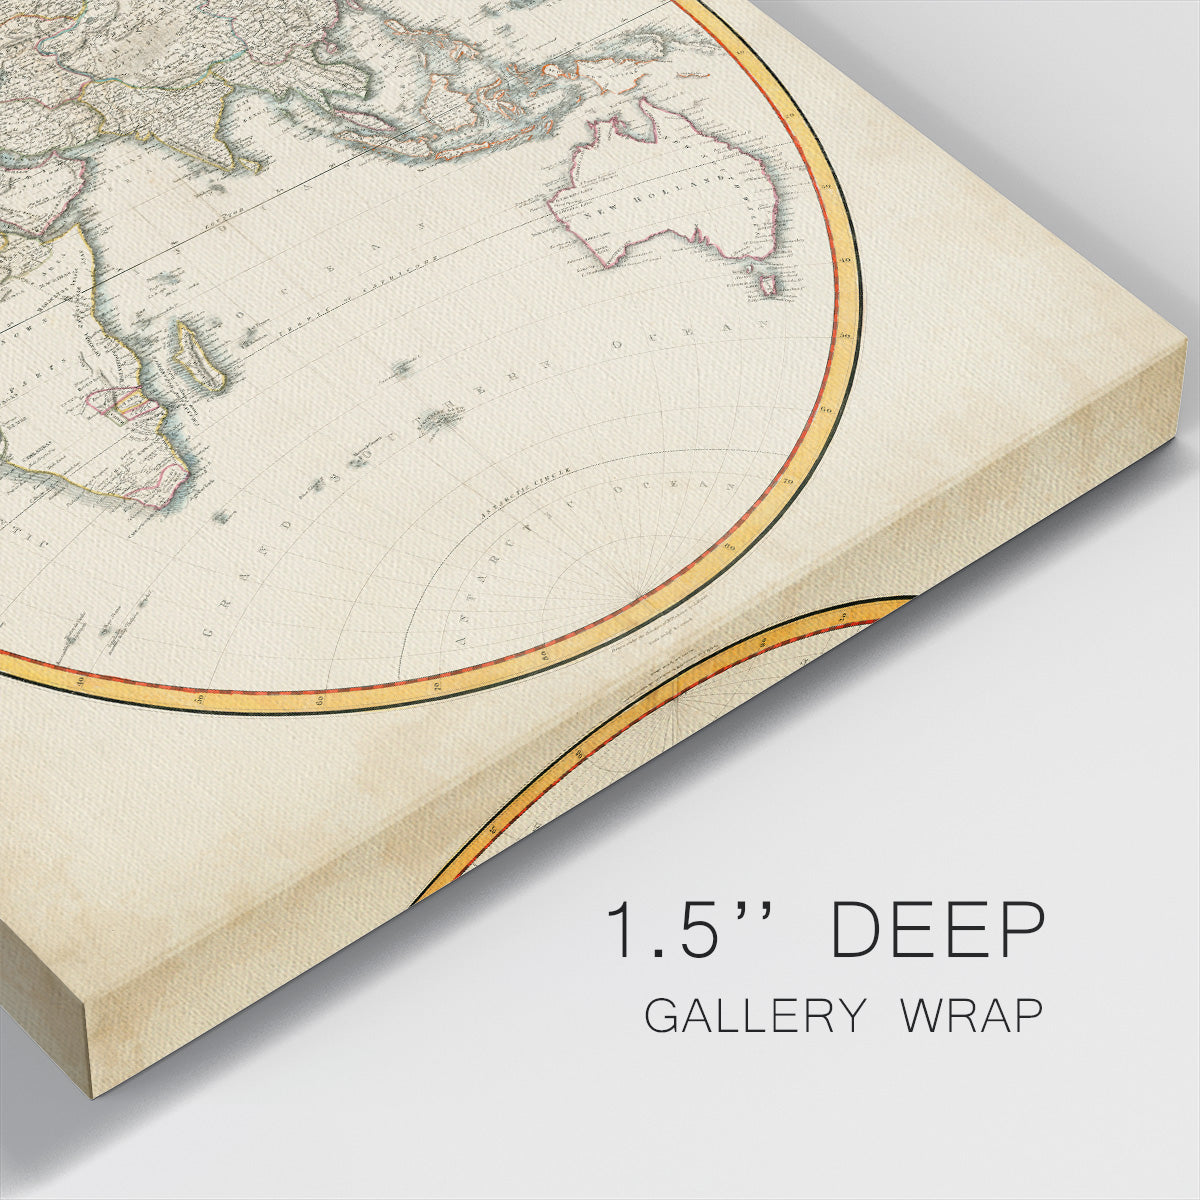 1812 Eastern Hemisphere-Premium Gallery Wrapped Canvas - Ready to Hang